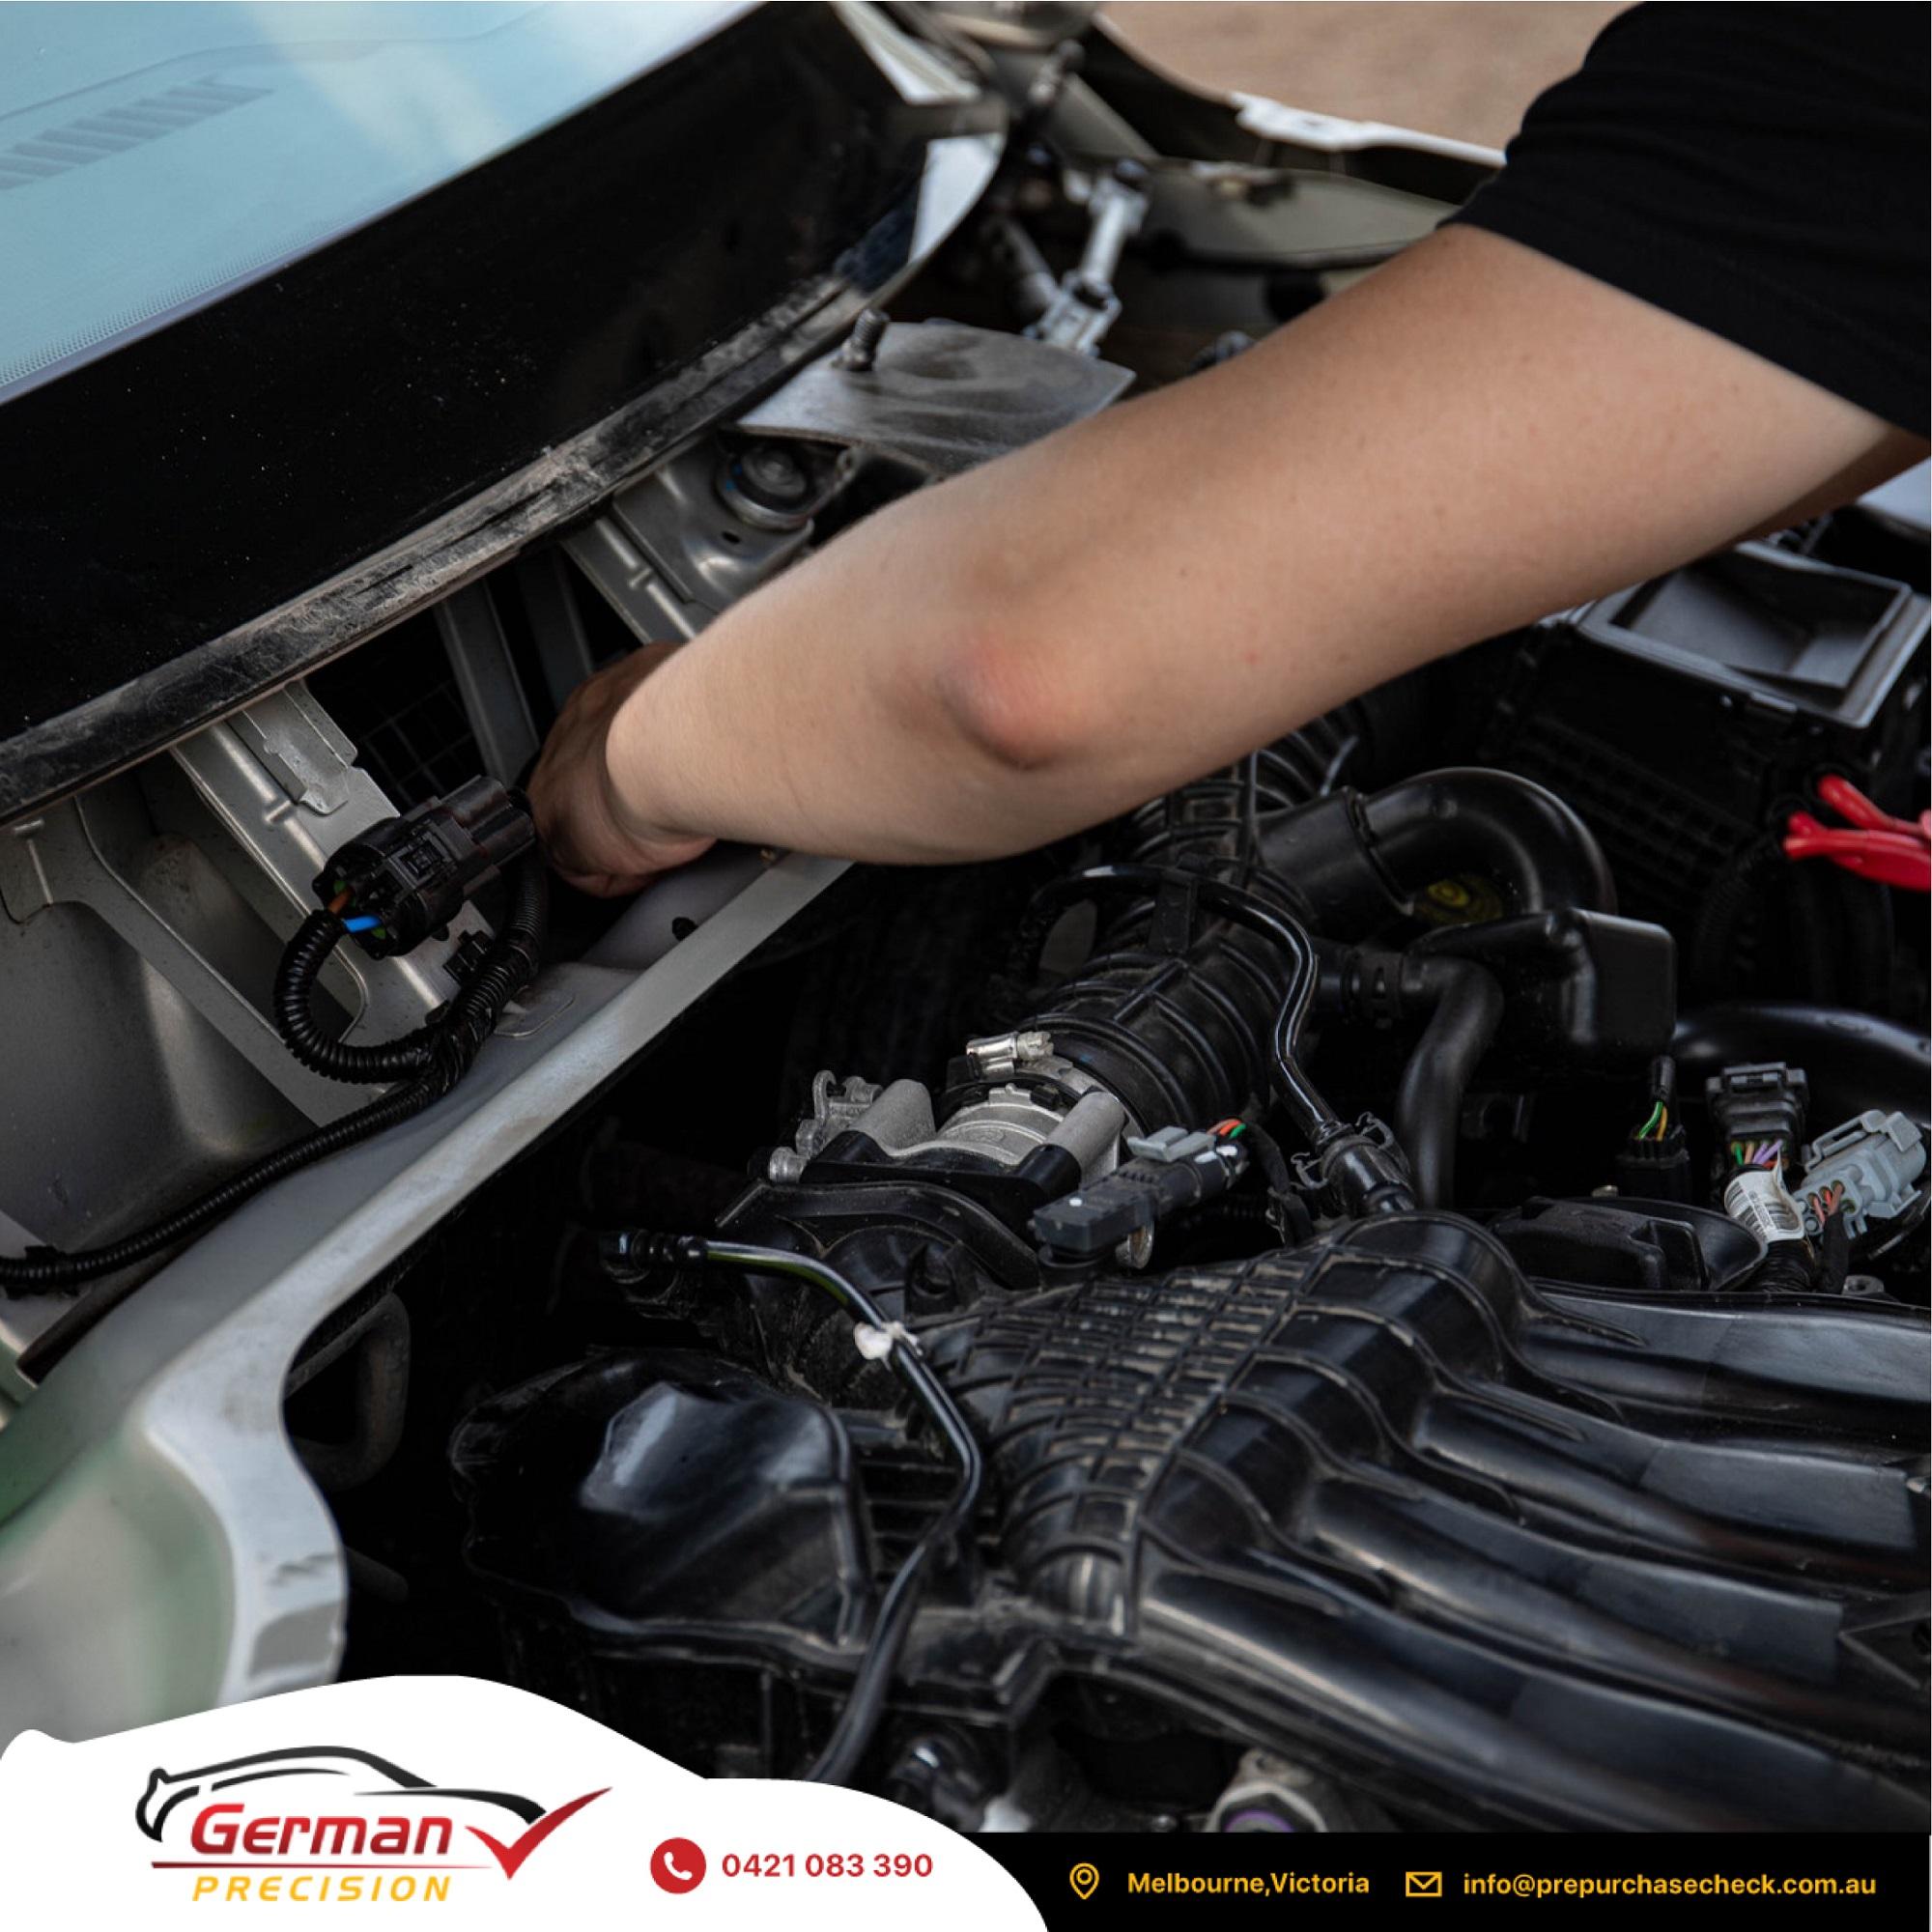 Pre purchase Car Inspection in Melbourne